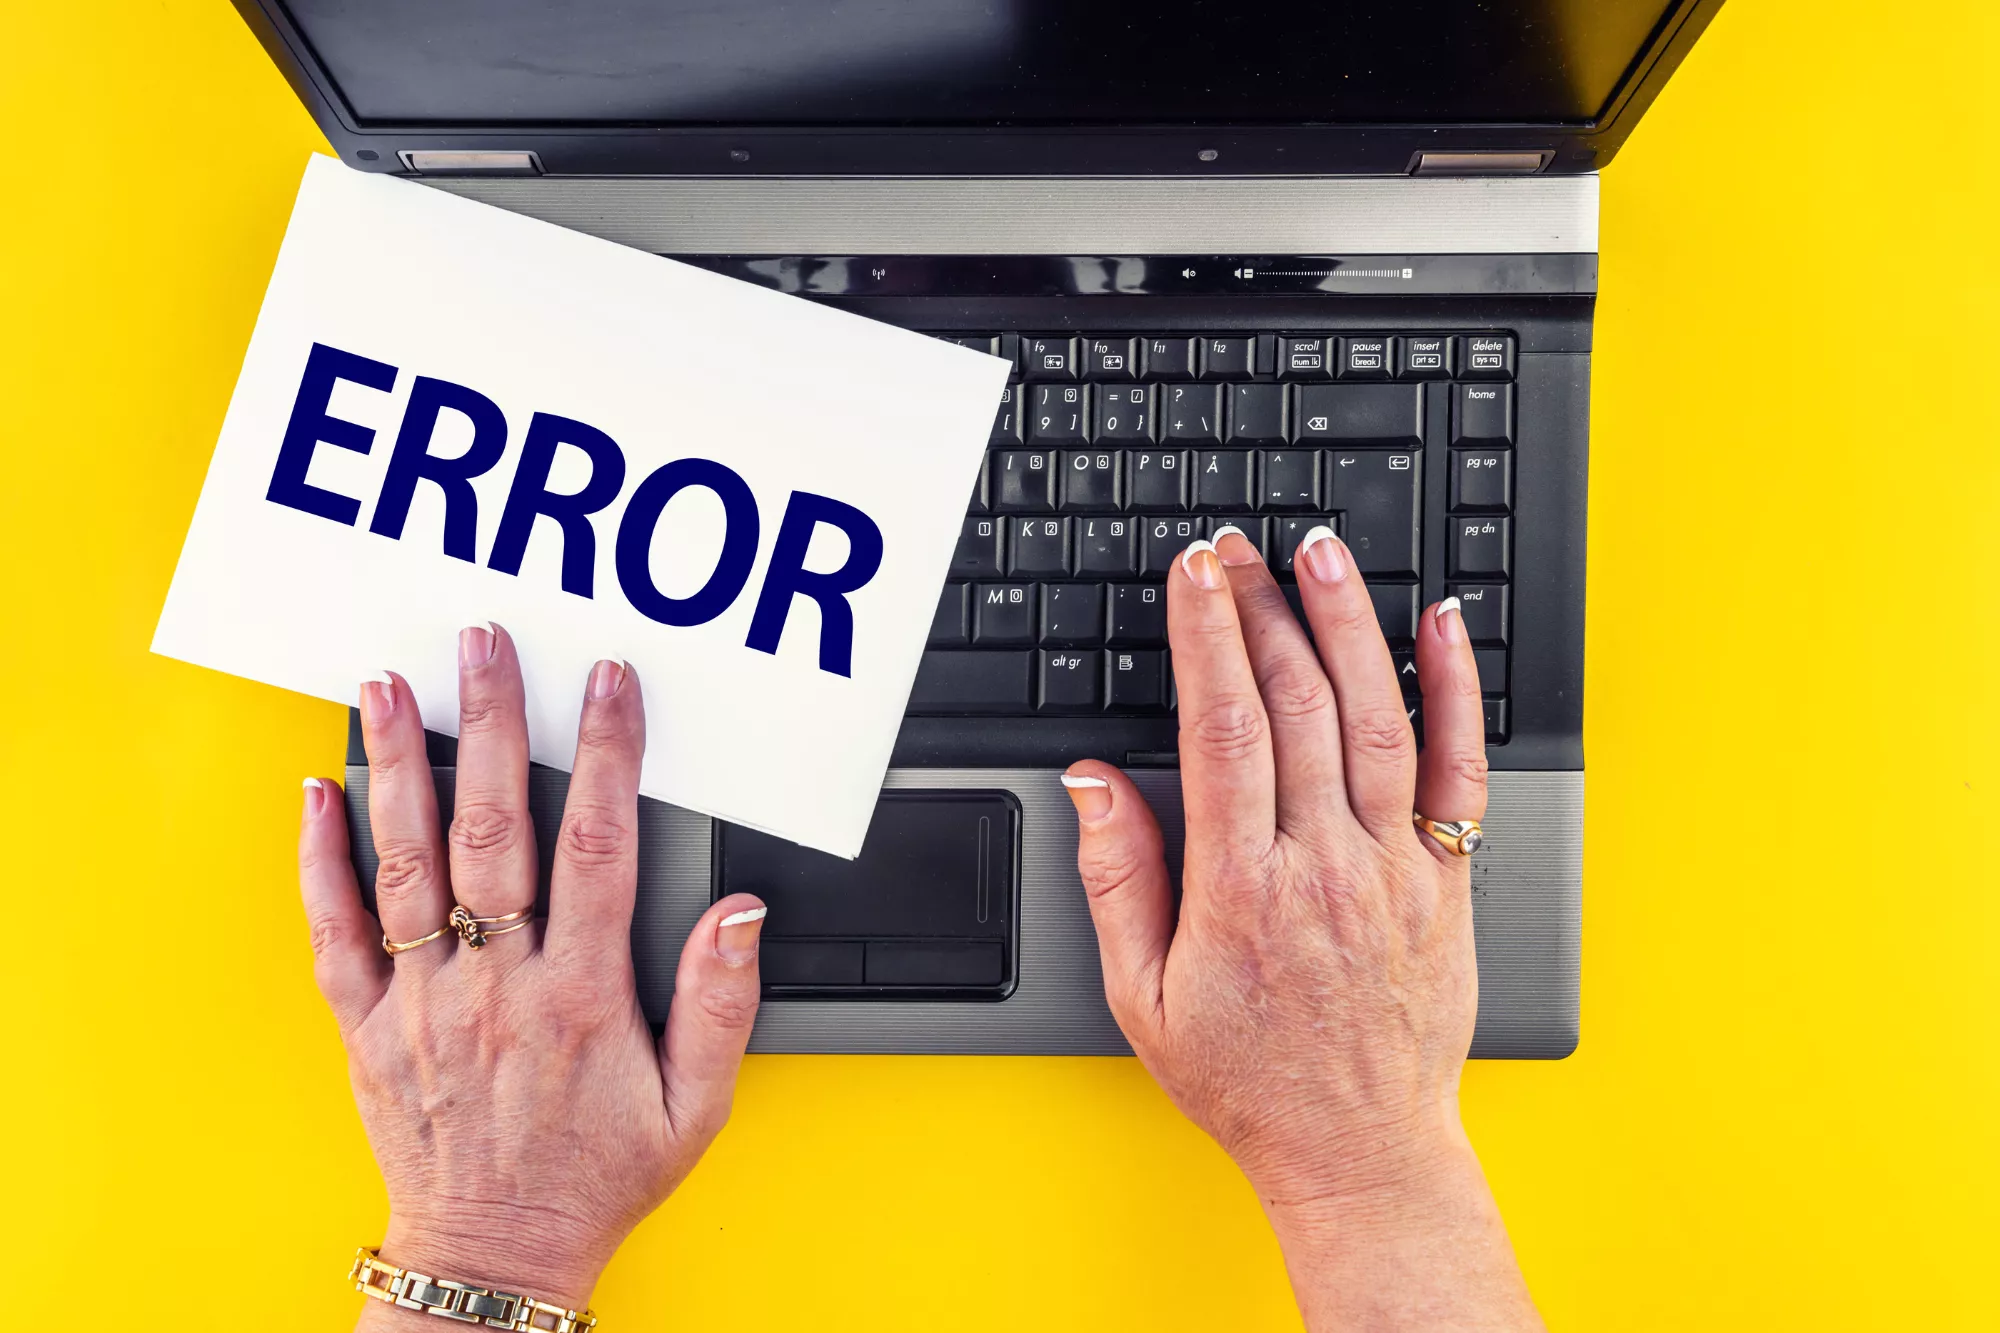 hands on the keyboard of an open laptop with a note saying "error" as someone receives ACH return code R62